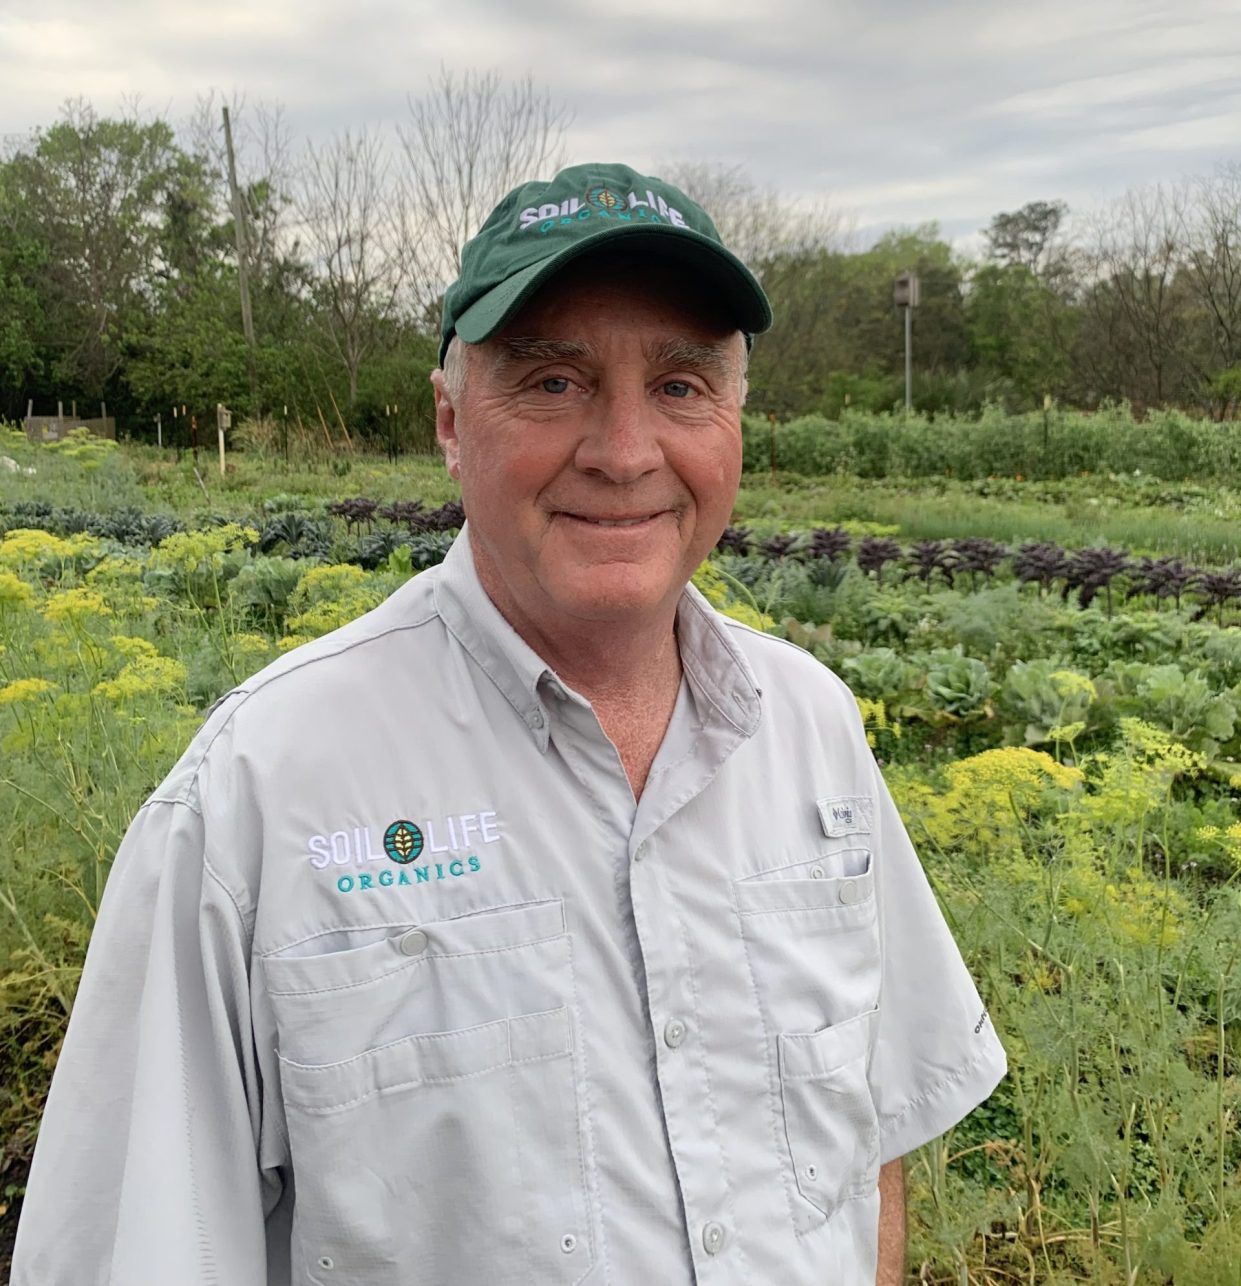 A portrait photo of Allen Skinner with a agricultural field on the background.